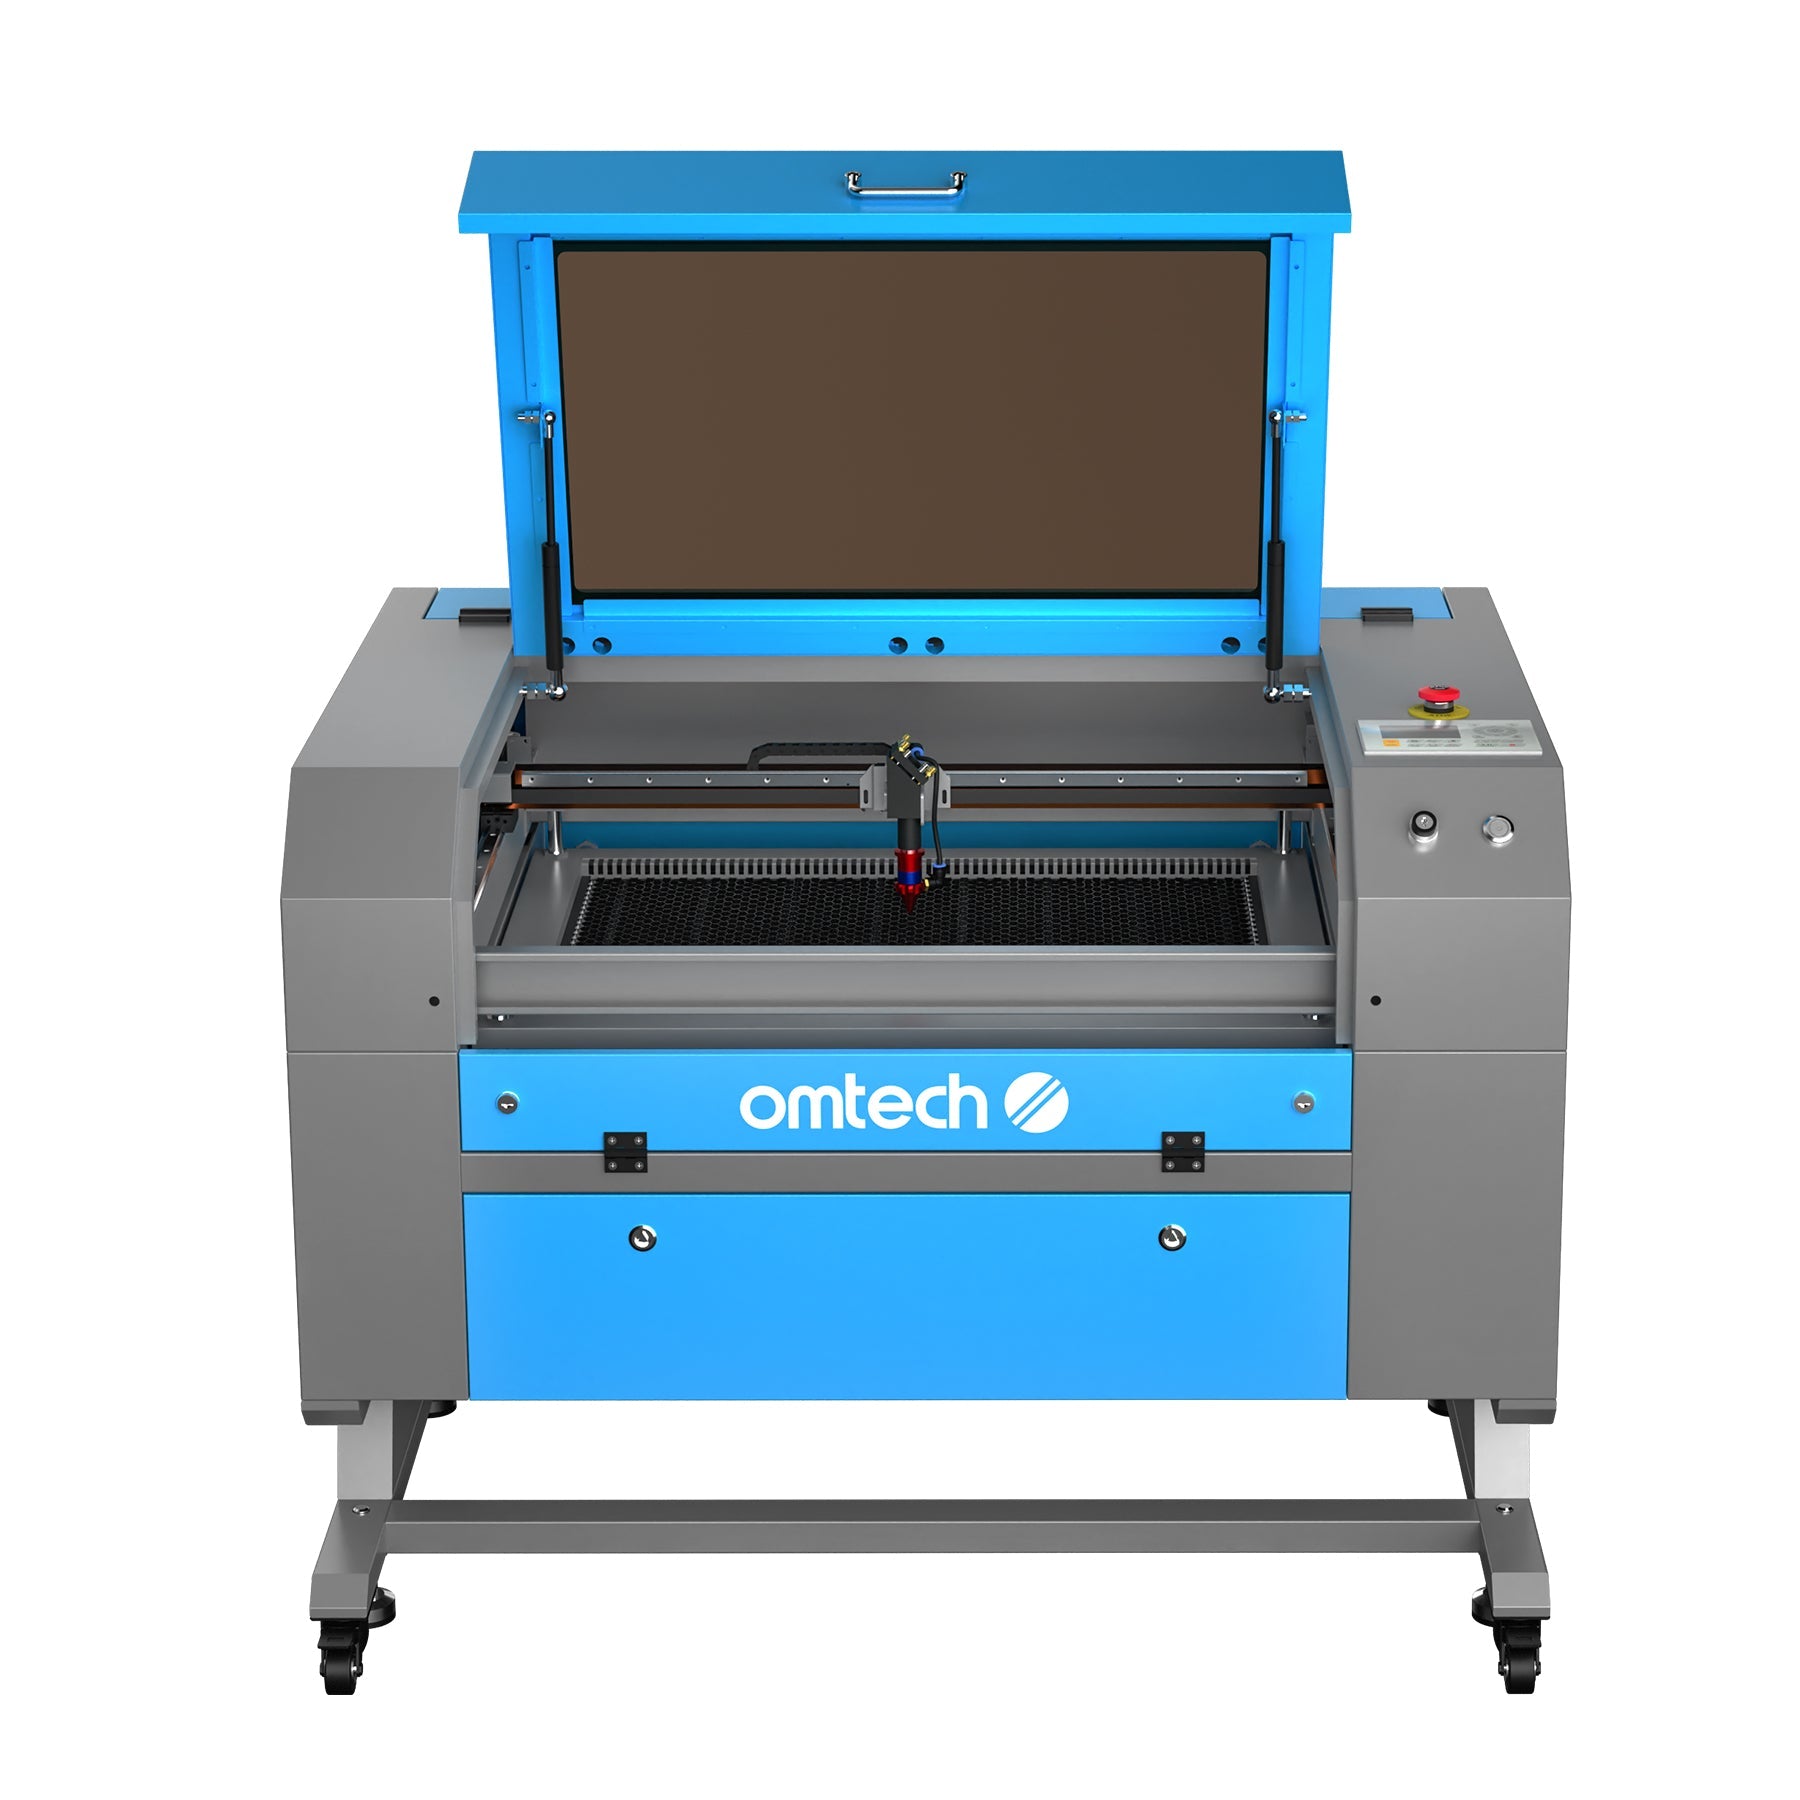 60W CO2 Laser Engraver - Pay as Low as $91/mo. - OMTech – OMTech Laser